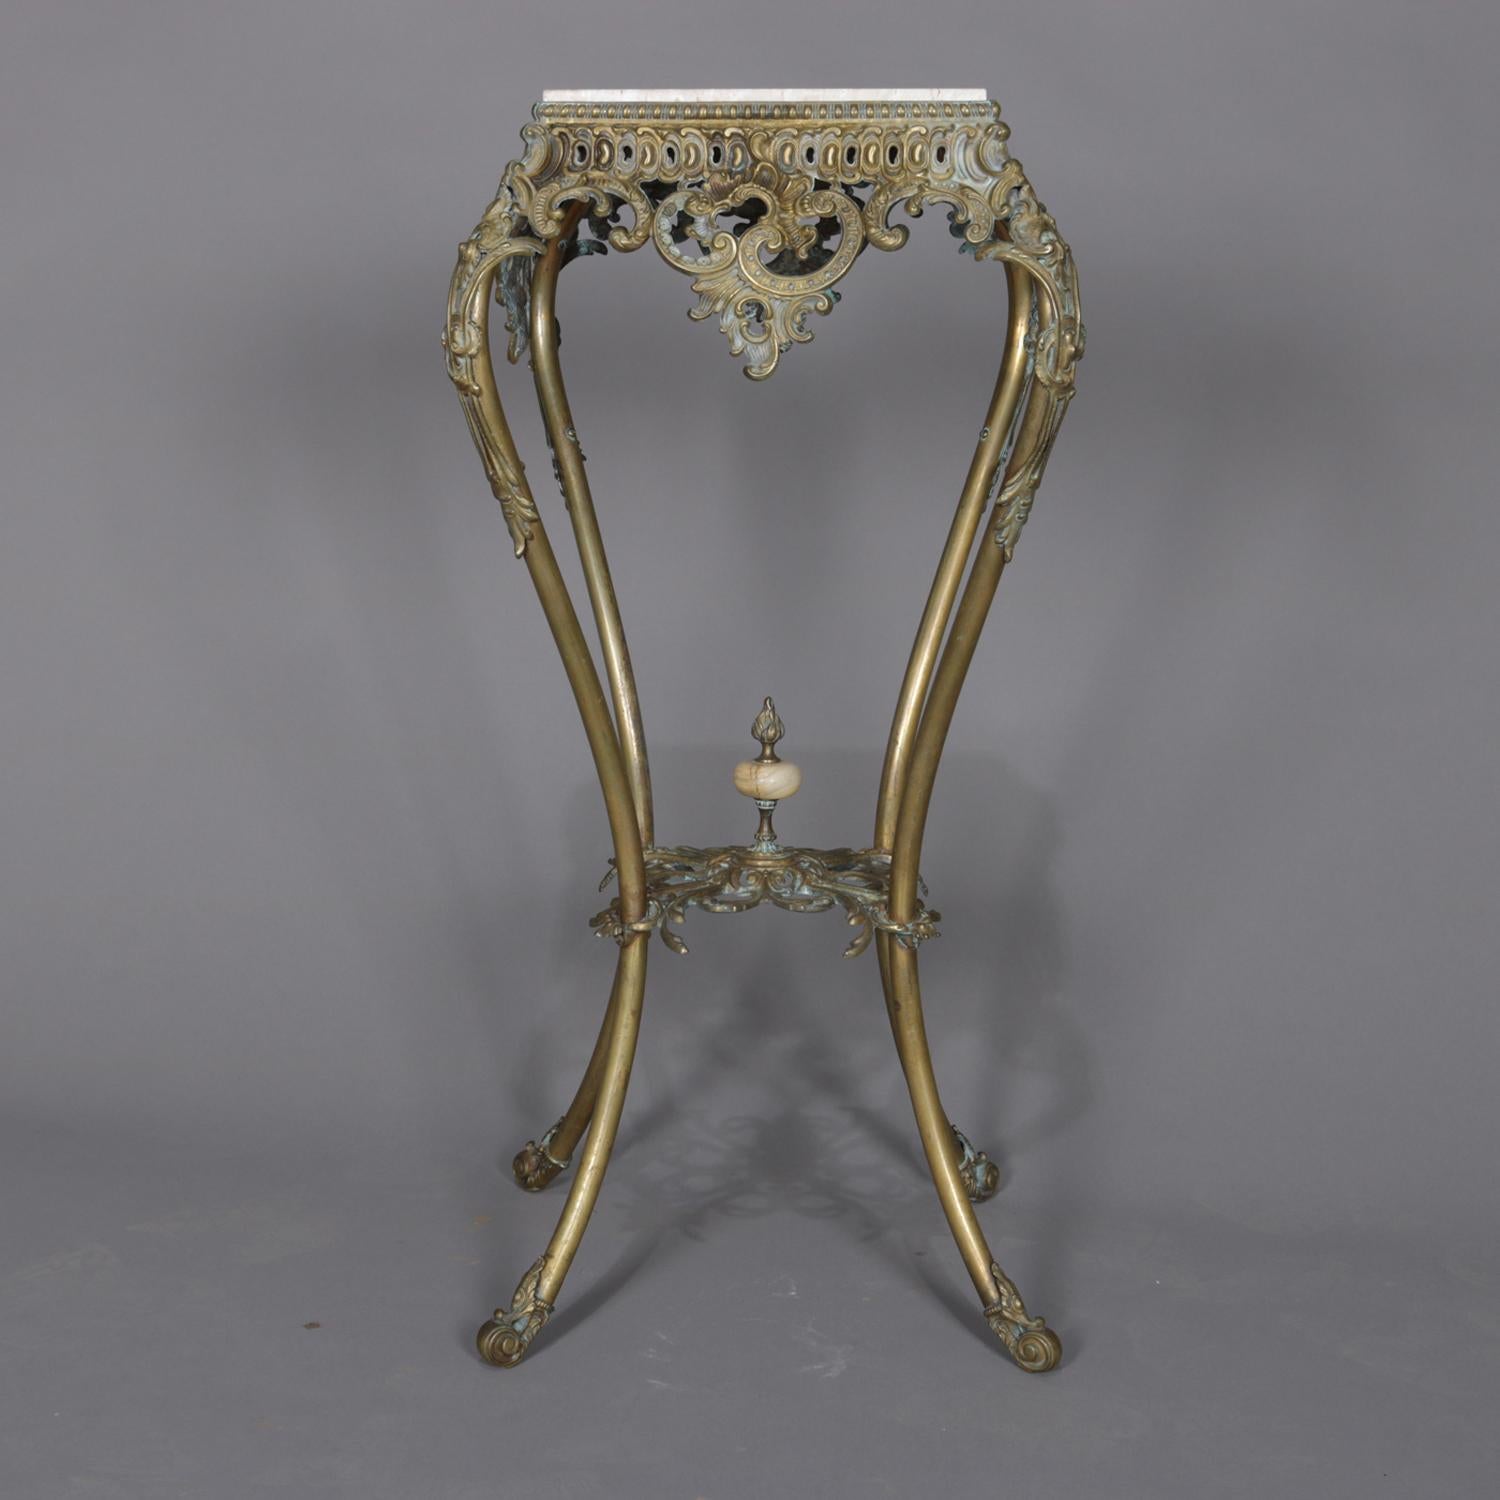 An antique French Rococo plant stand features gilt bronze base with pierced scroll and foliate apron and cabriole legs terminating in scroll feet and surmounted by faux marble tile top, circa 1890.

Measures: 33.5